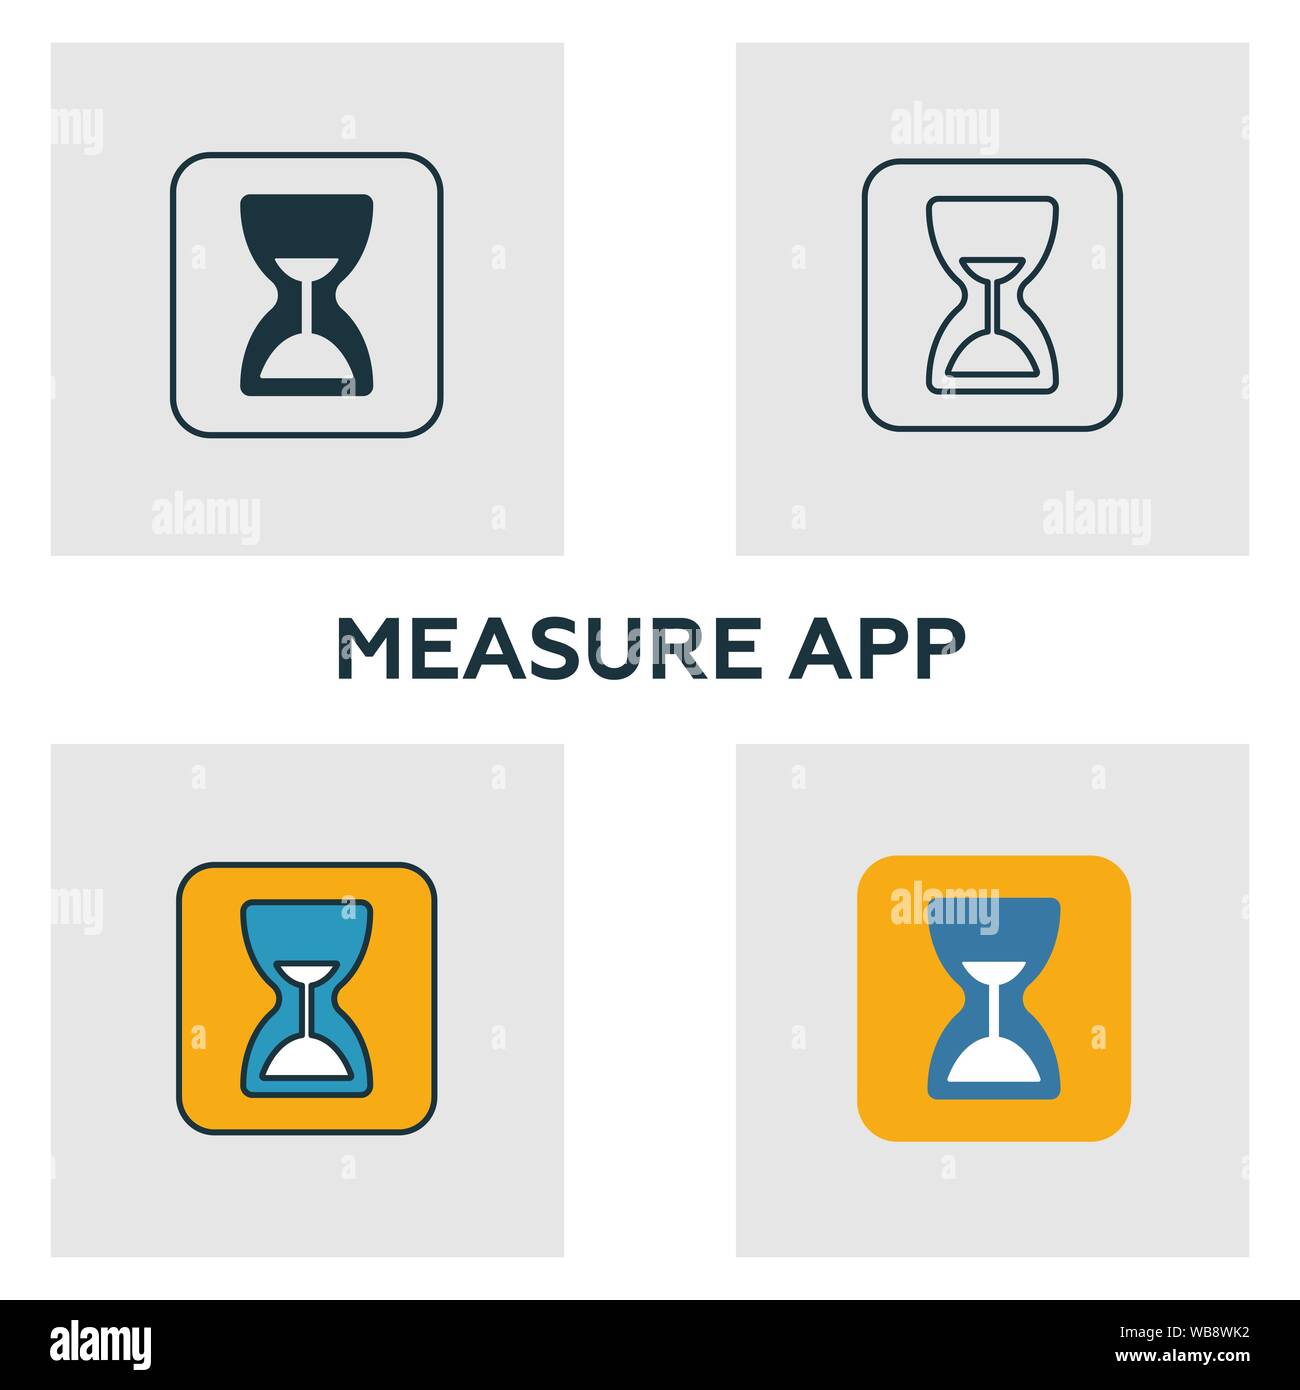 Measure App icon set. Four elements in diferent styles from visual device icons collection. Creative measure app icons filled, outline, colored and Stock Vector